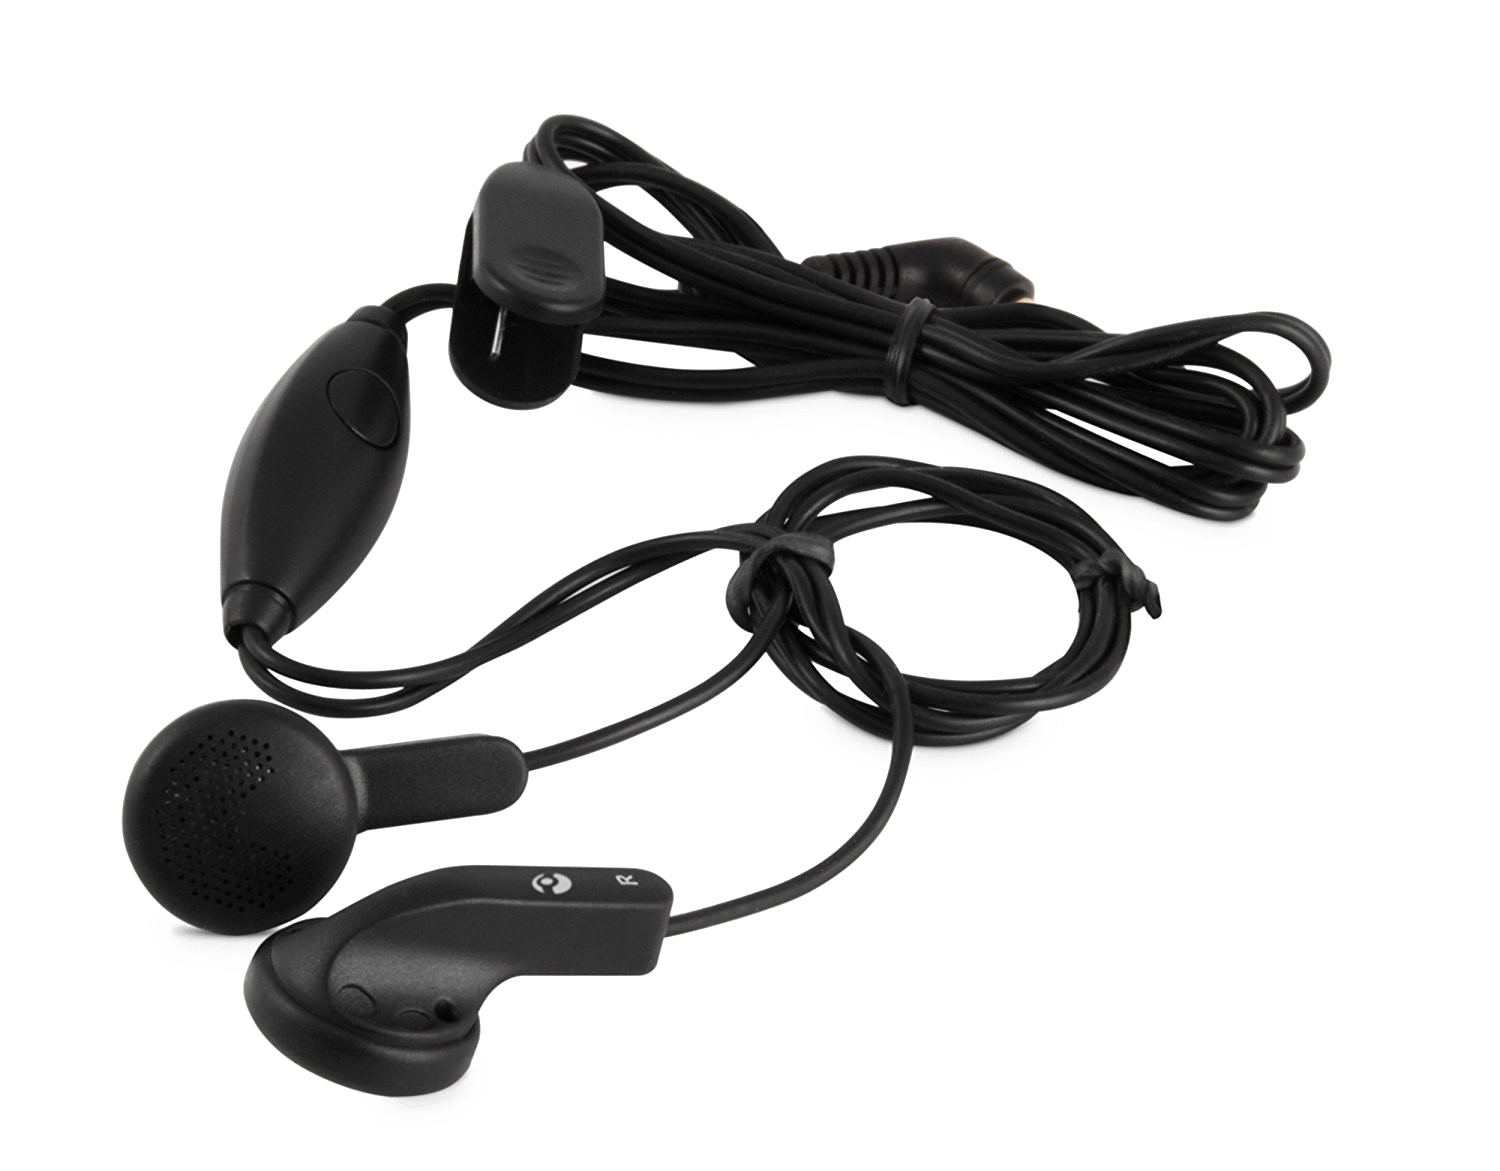 Mobile Earphone PNG Pic